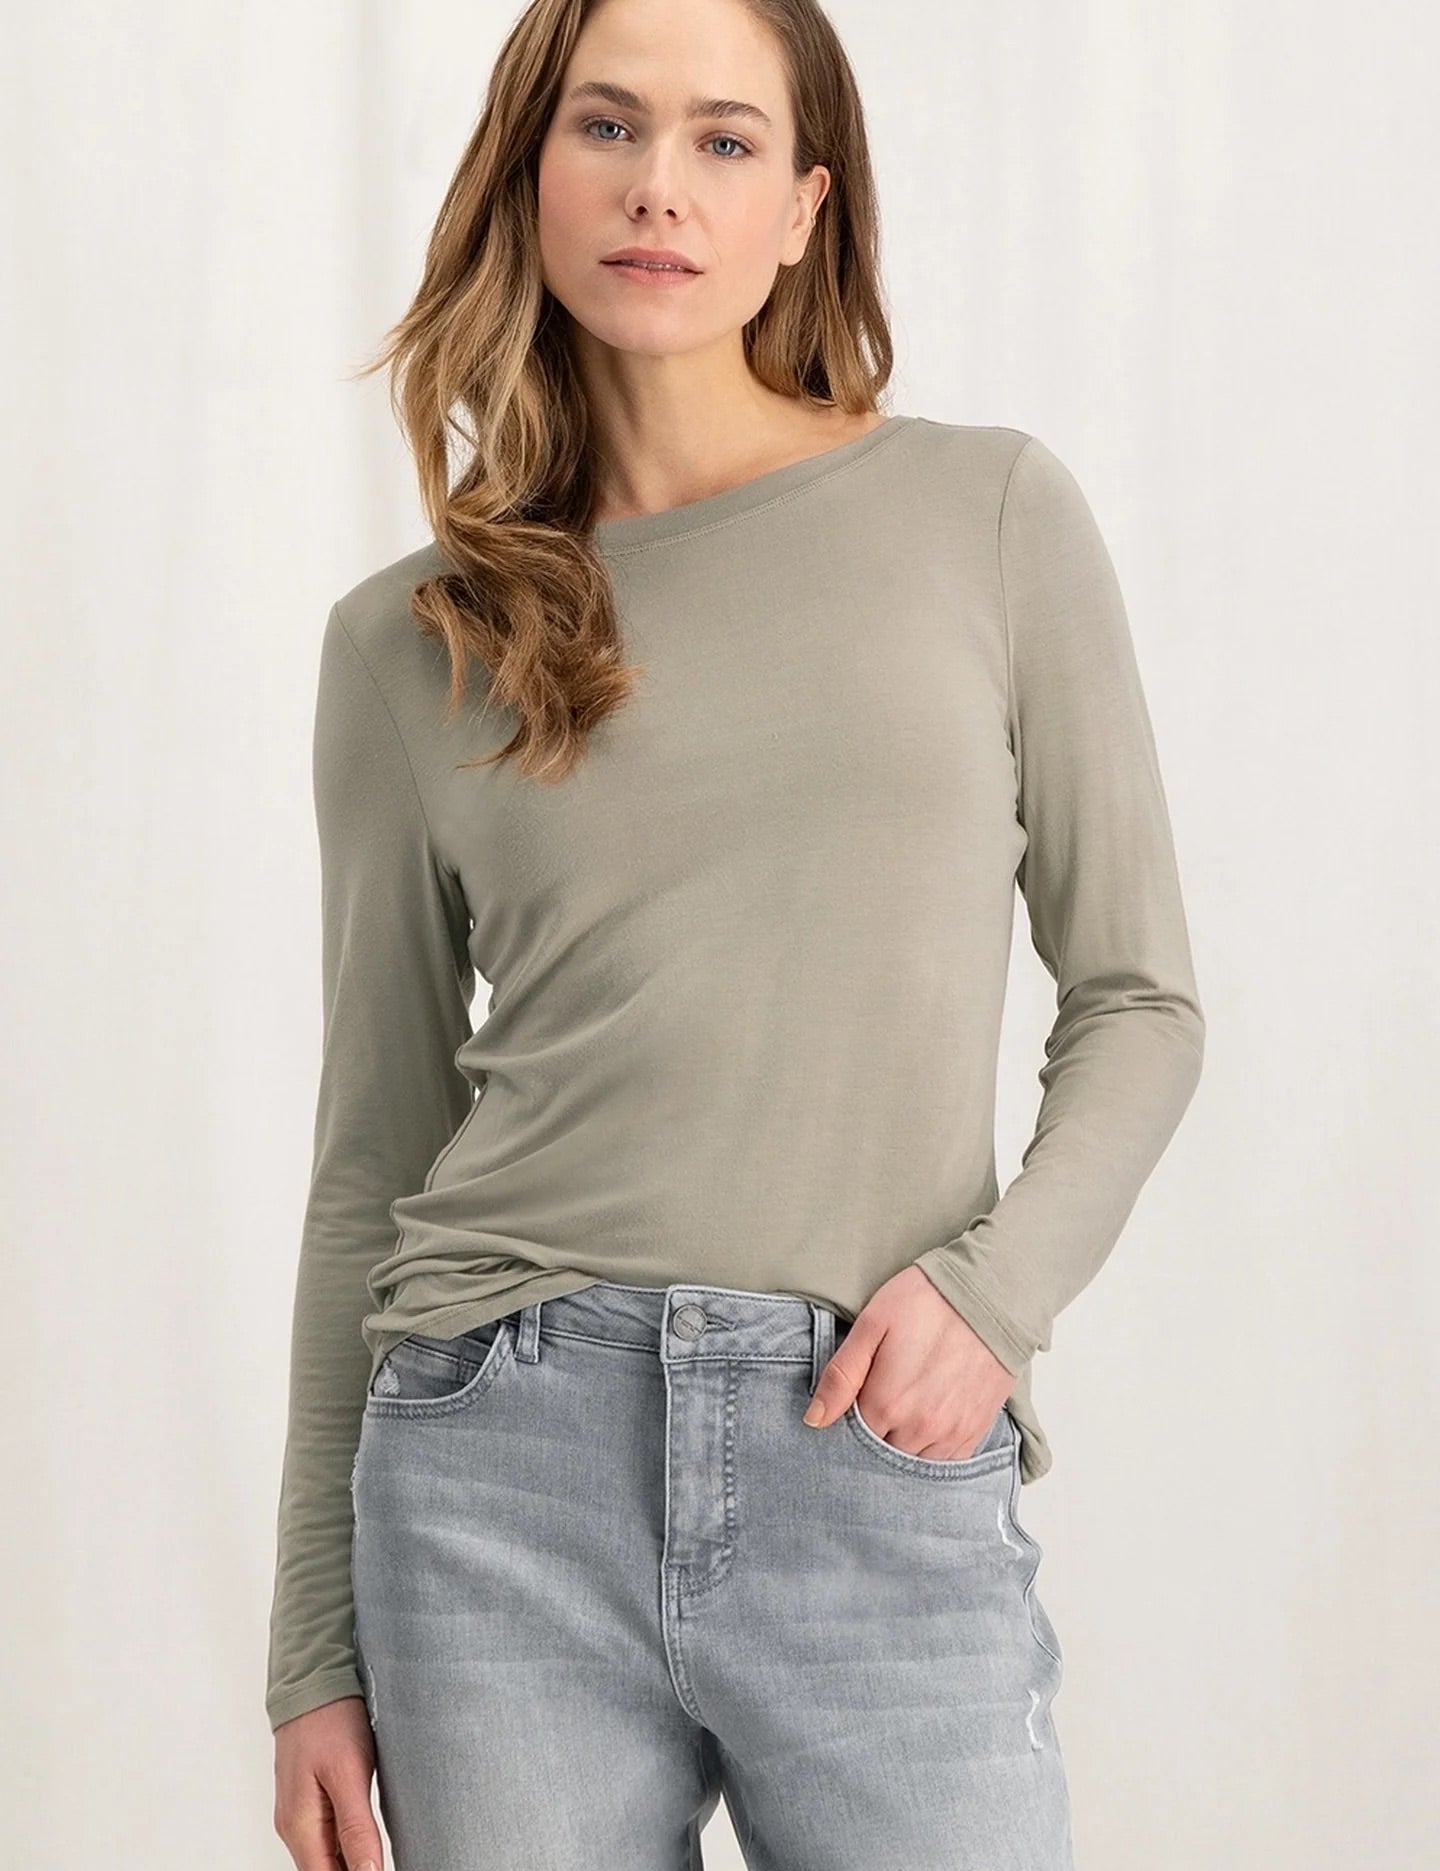 t-shirt-with-boatneck-and-long-sleeves-in-regular-fit-aluminium-beige_2880x_jpg.jpg